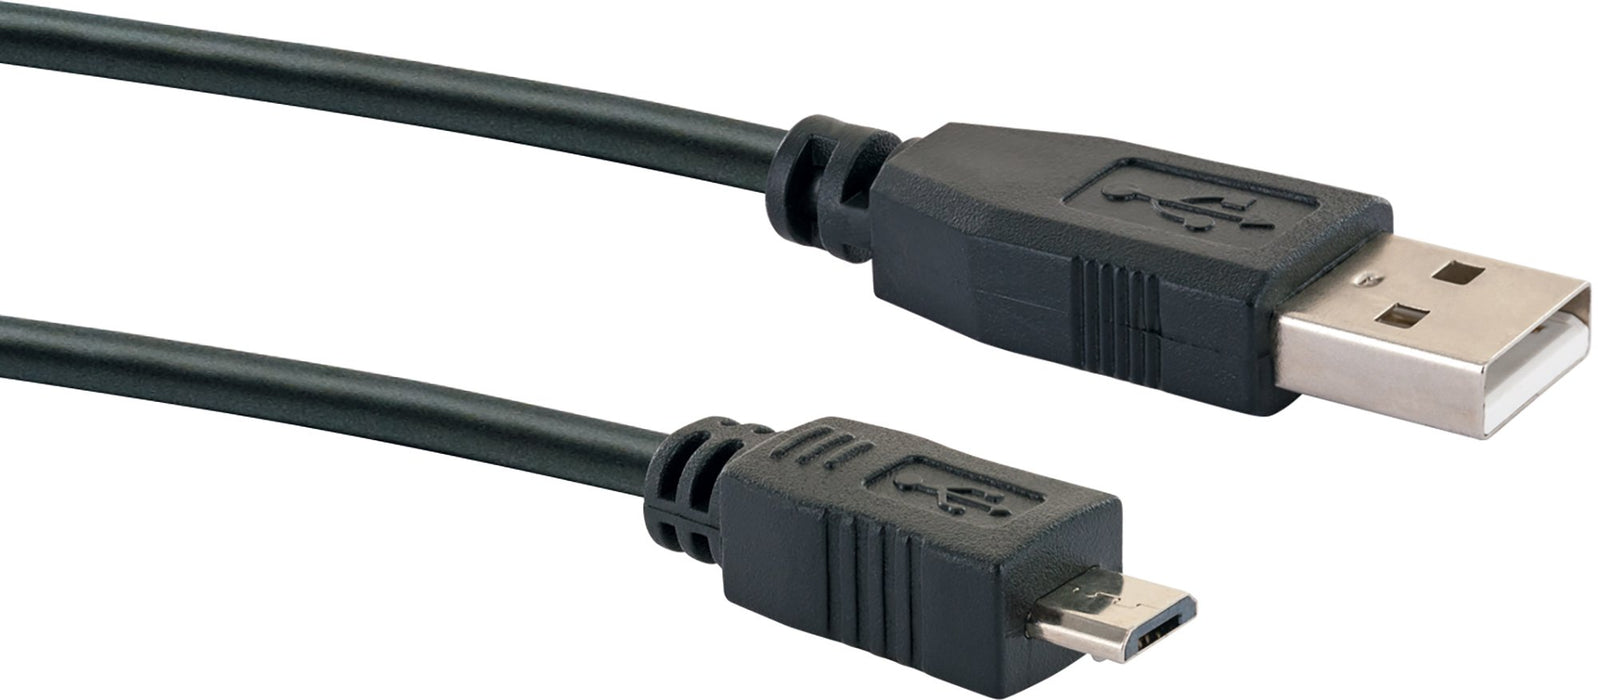 USB 2.0 connection cable